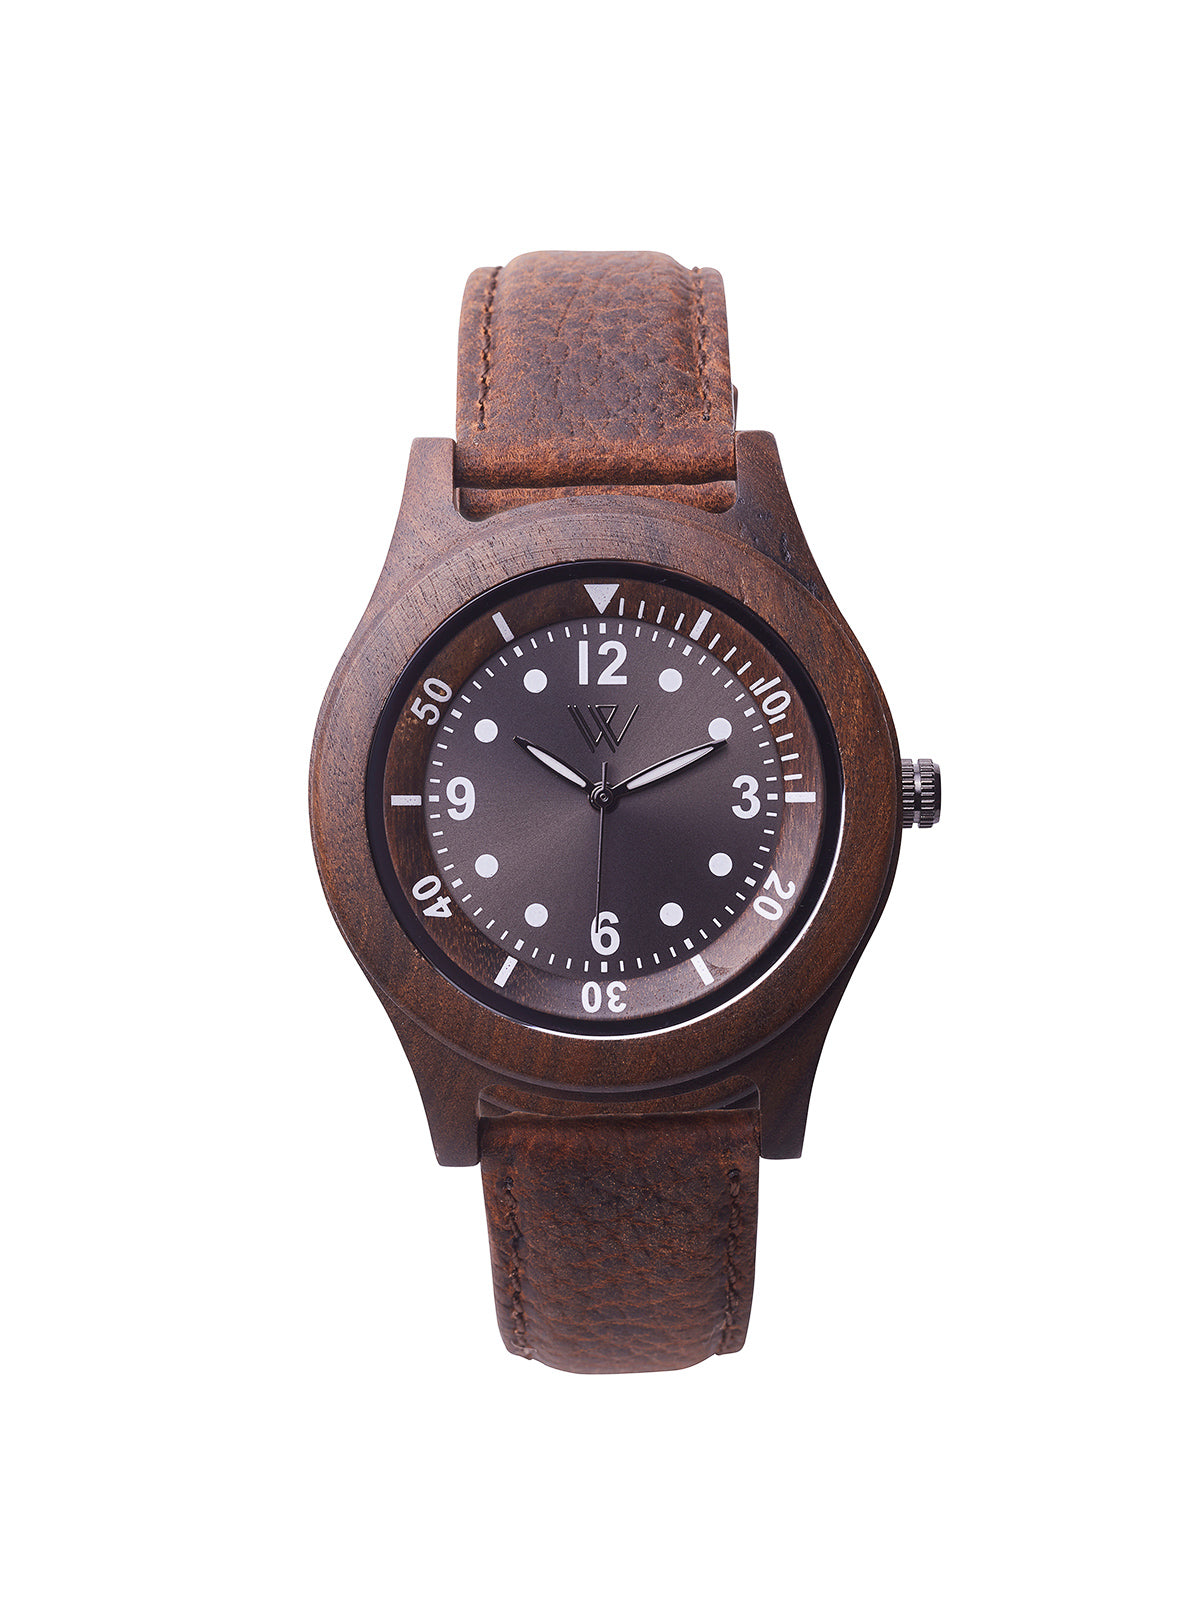 Wooden Watch Sandalwood and leather - Woodstylz